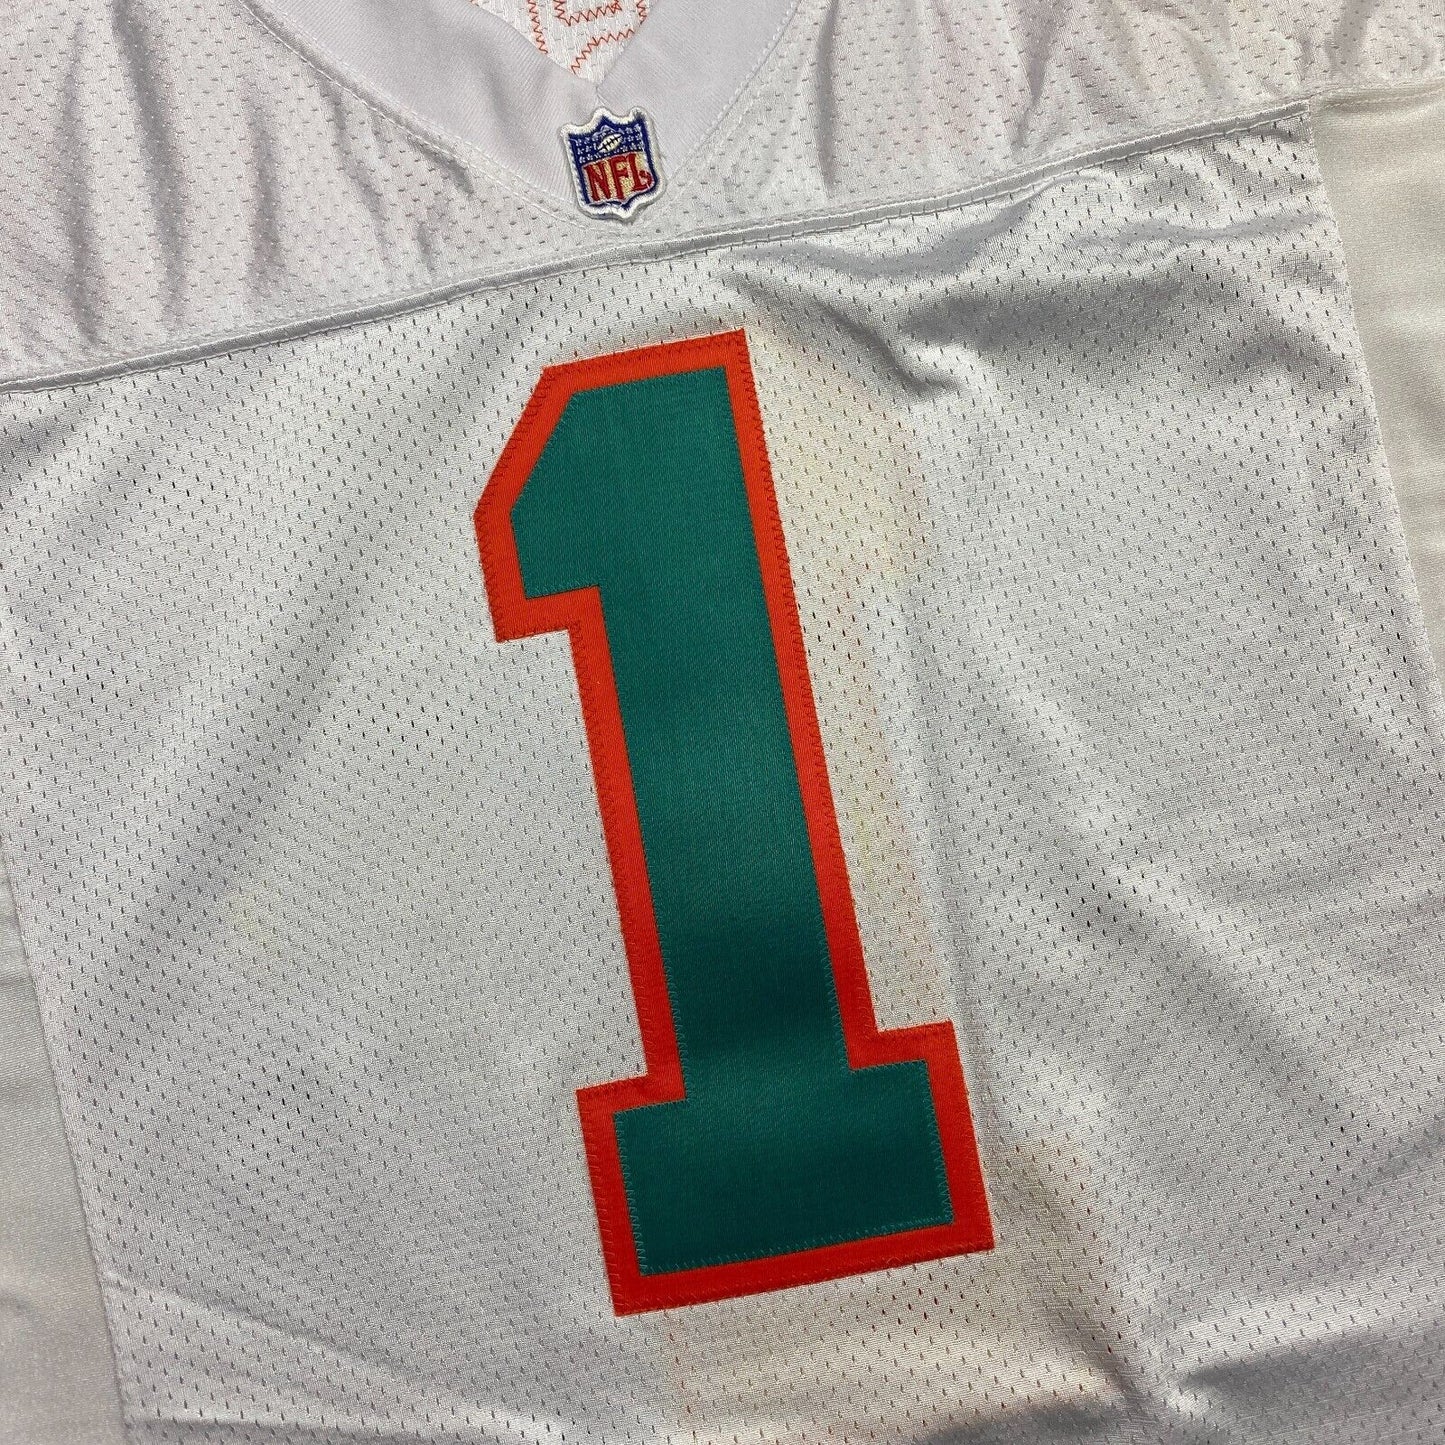 Don Shula Vintage Wilson Pro Line Dolphins Authentic Jersey Size 44 L - marino